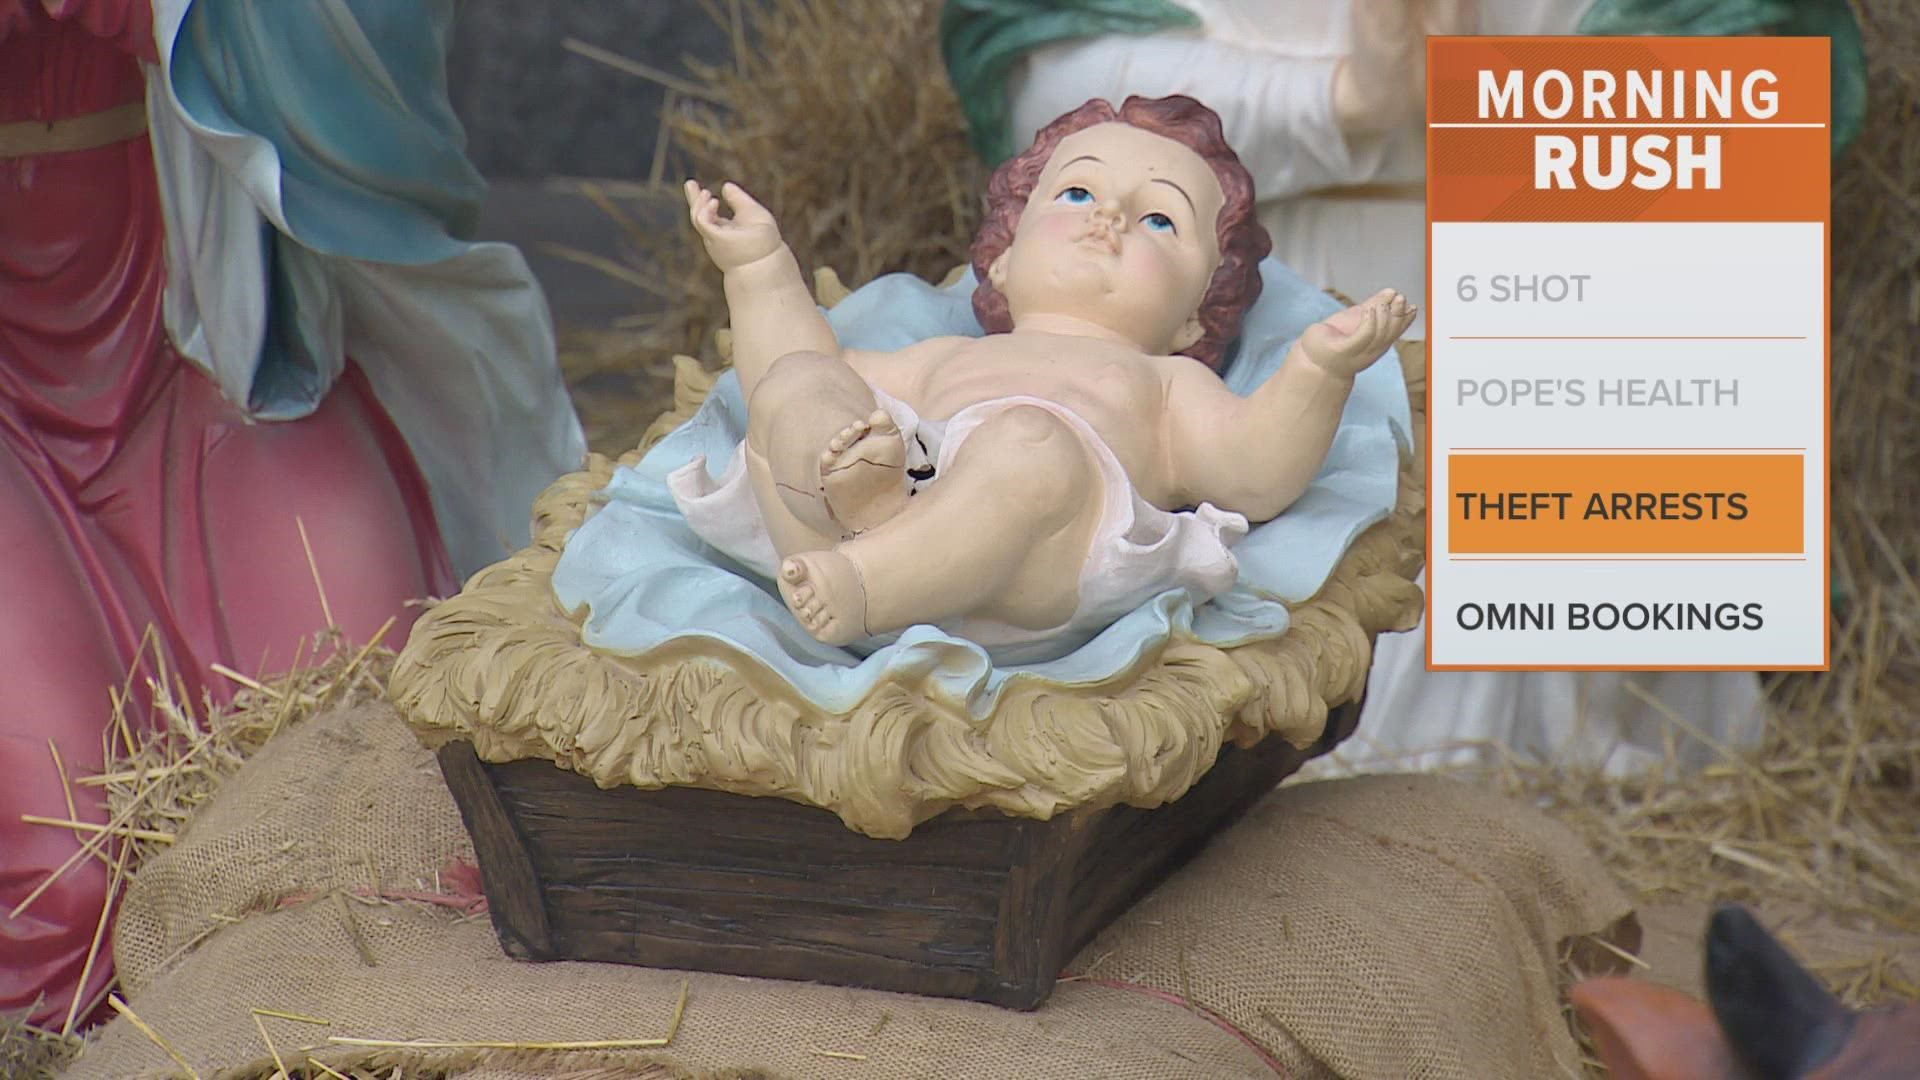 The doll that was stolen from a Nativity display at the Sundance Square plaza in Fort Worth was returned by police last week.